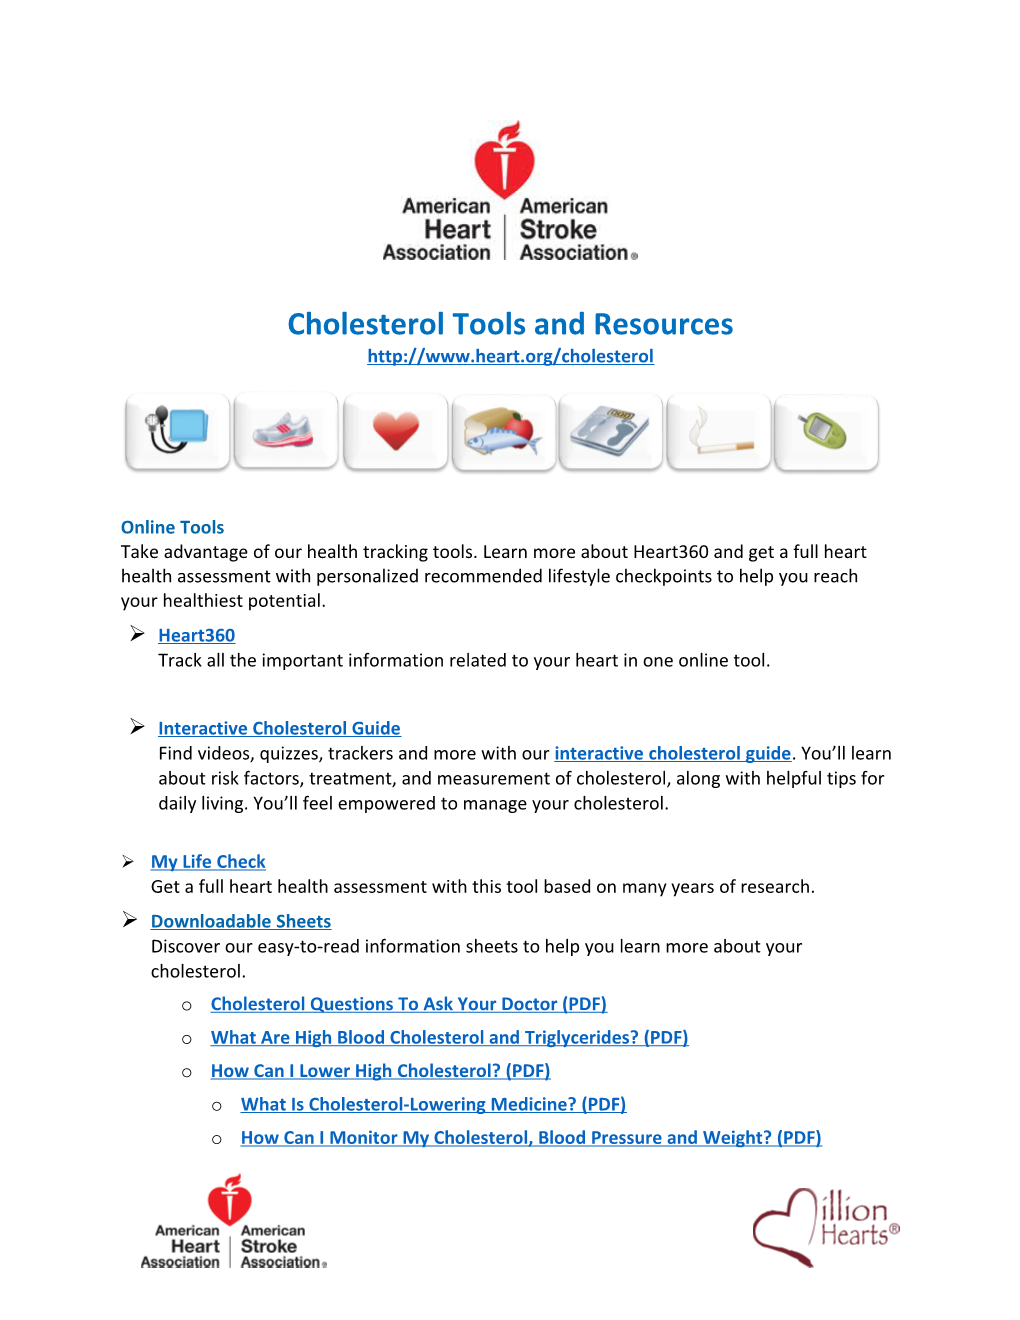 Cholesterol Tools and Resources